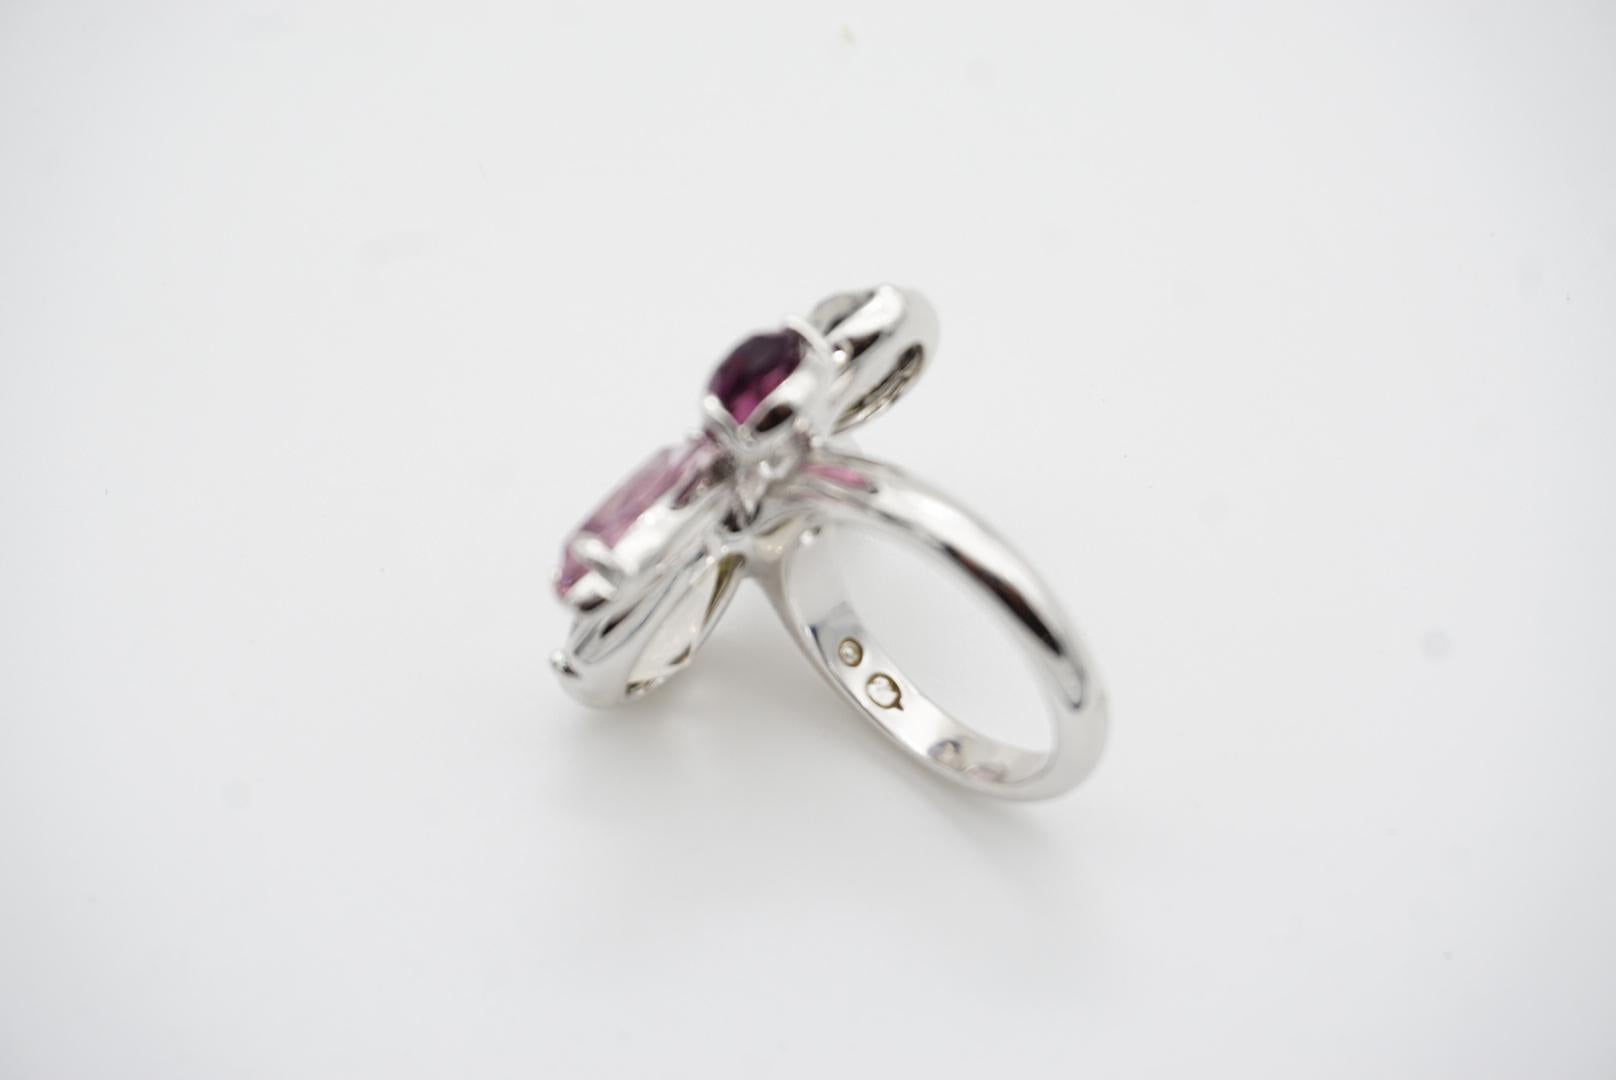 Swarovski Nirvana Cocktail Clear Purple Crystal Flower Ring, Silver, Size 55 For Sale 6